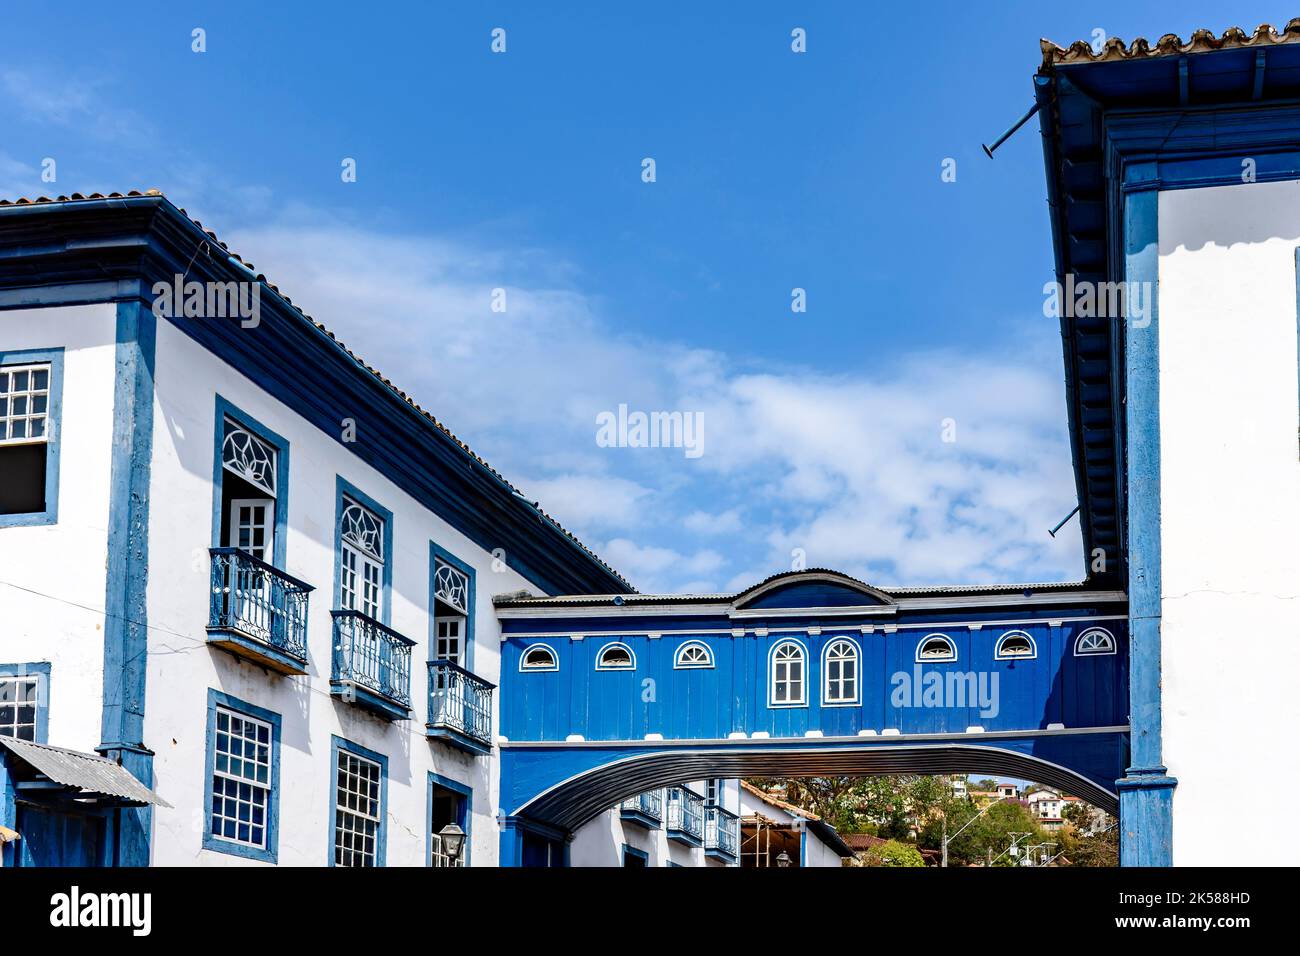 One of the most famous places in Diamantina in the state of Minas Gerais, Casa da Gloria with its suspended walkway connecting two historic houses Stock Photo